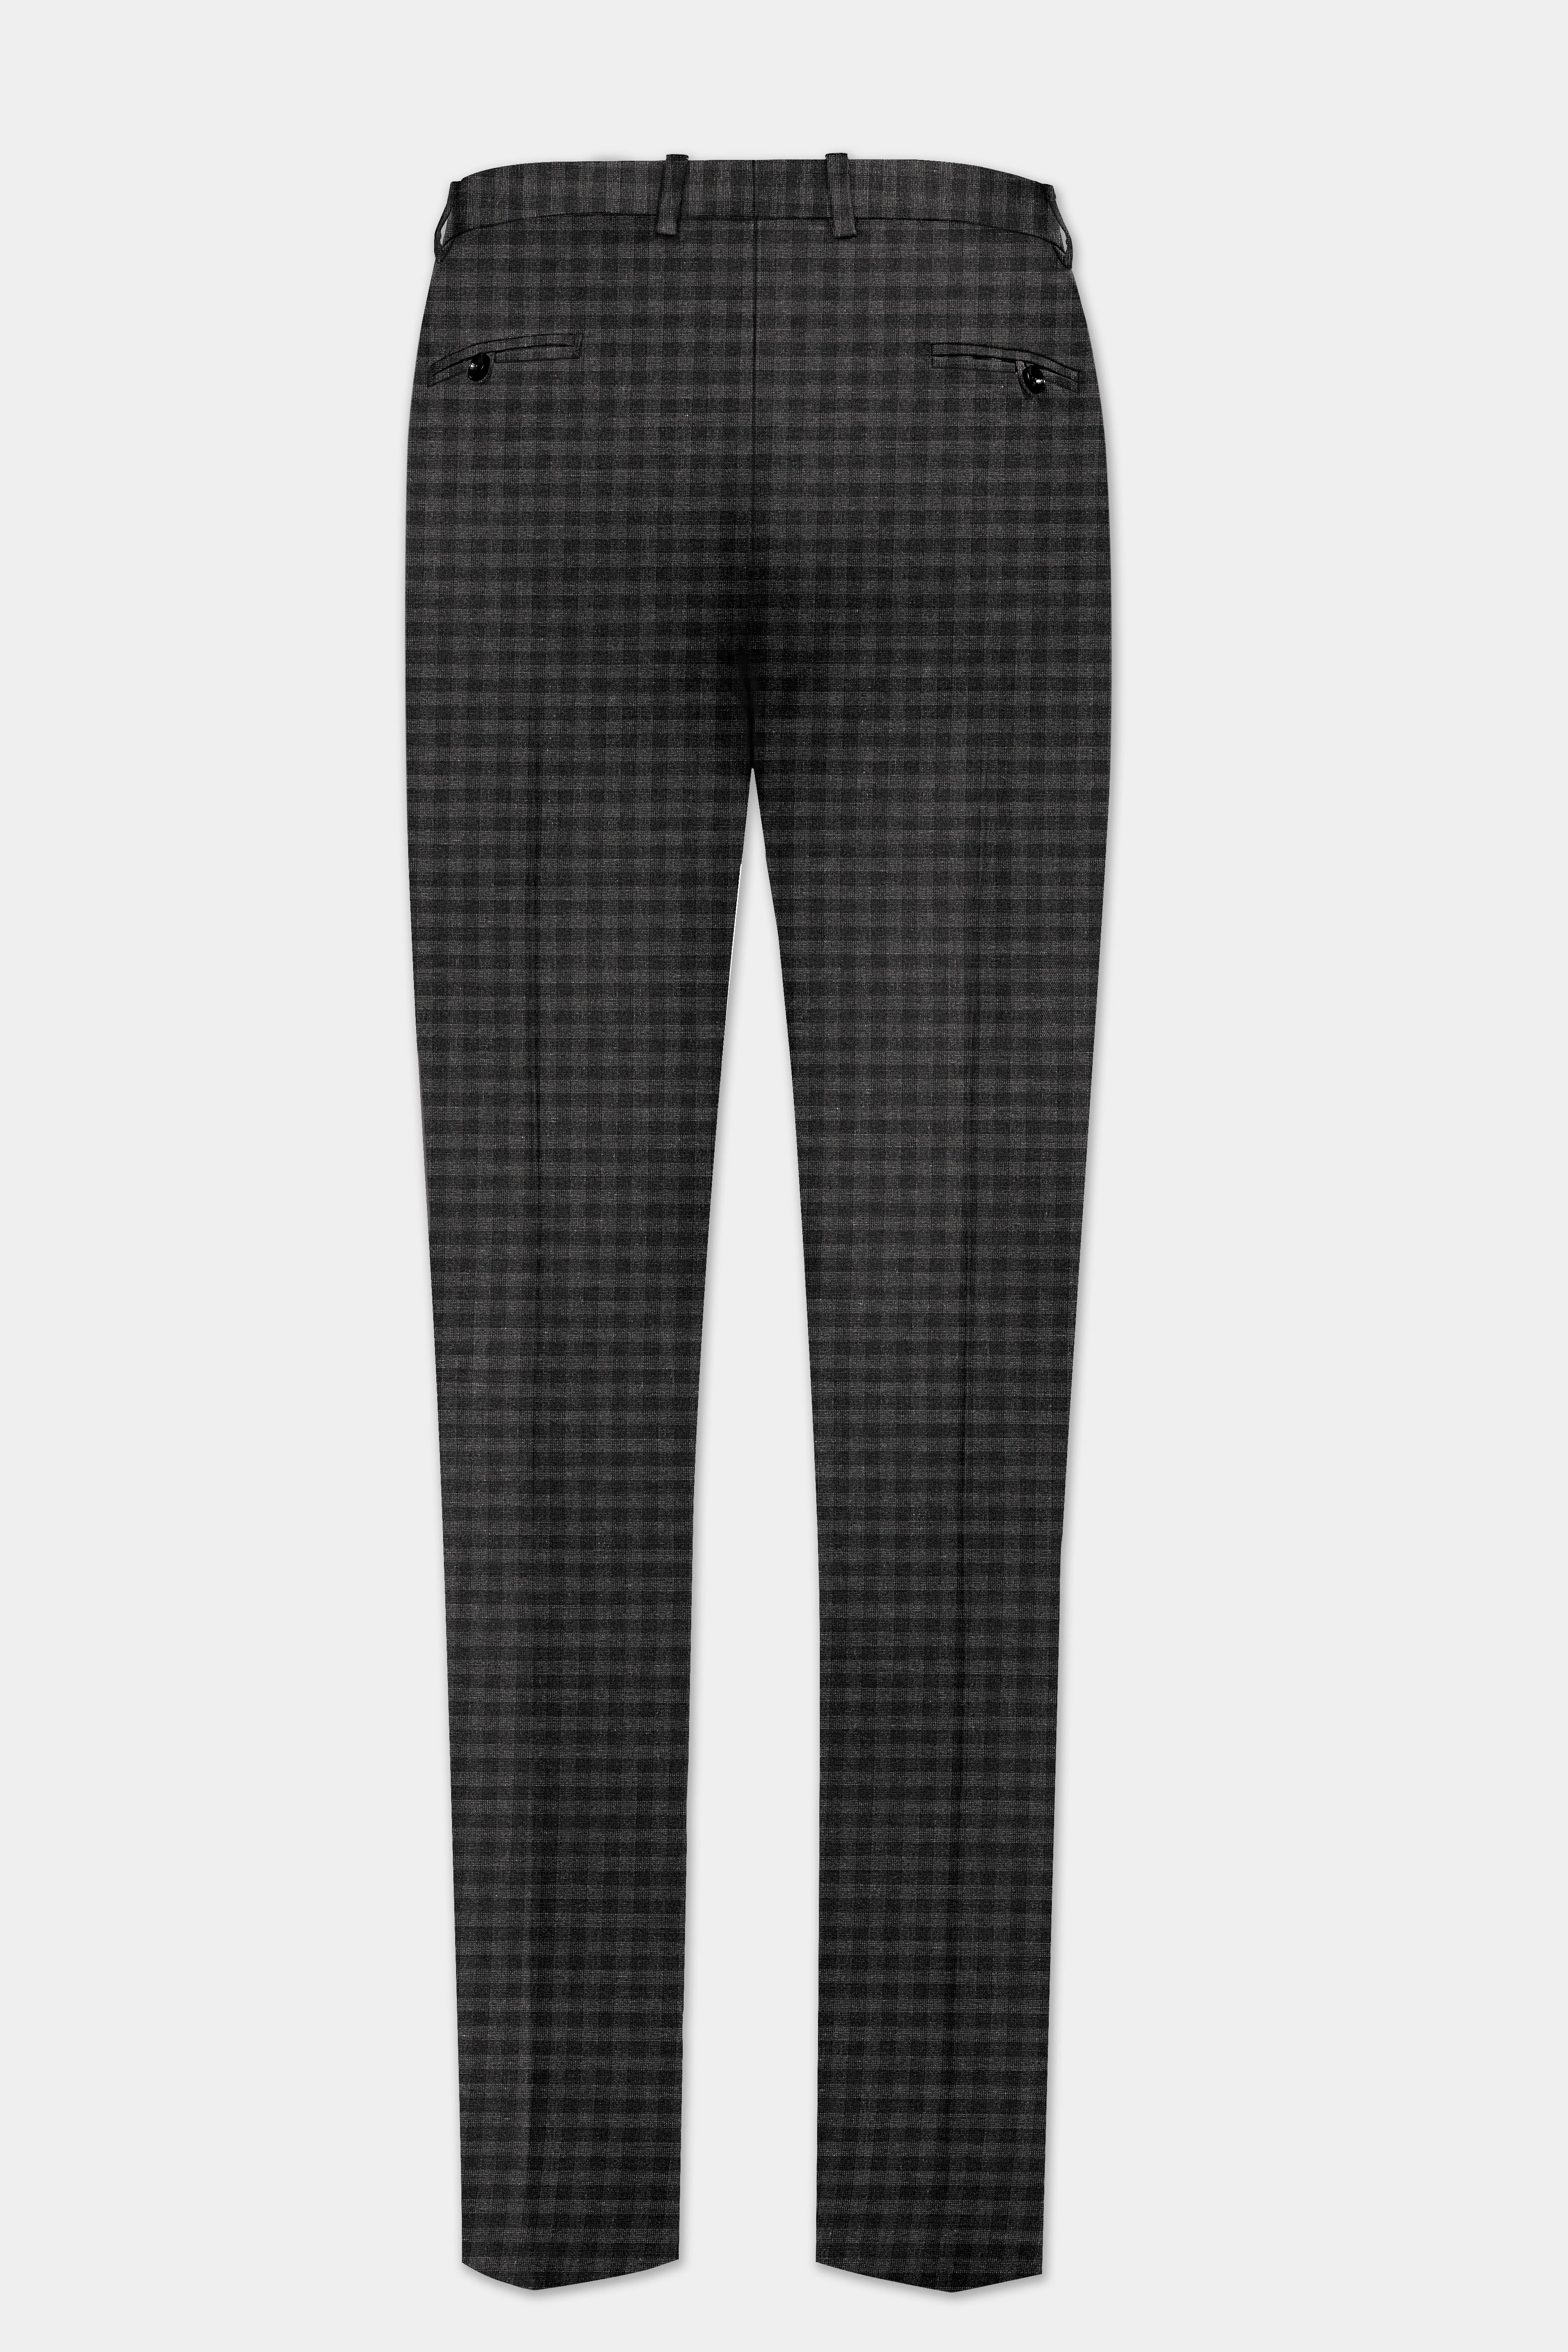 Piano Gray Plaid Wool Blend Single Breasted Suit